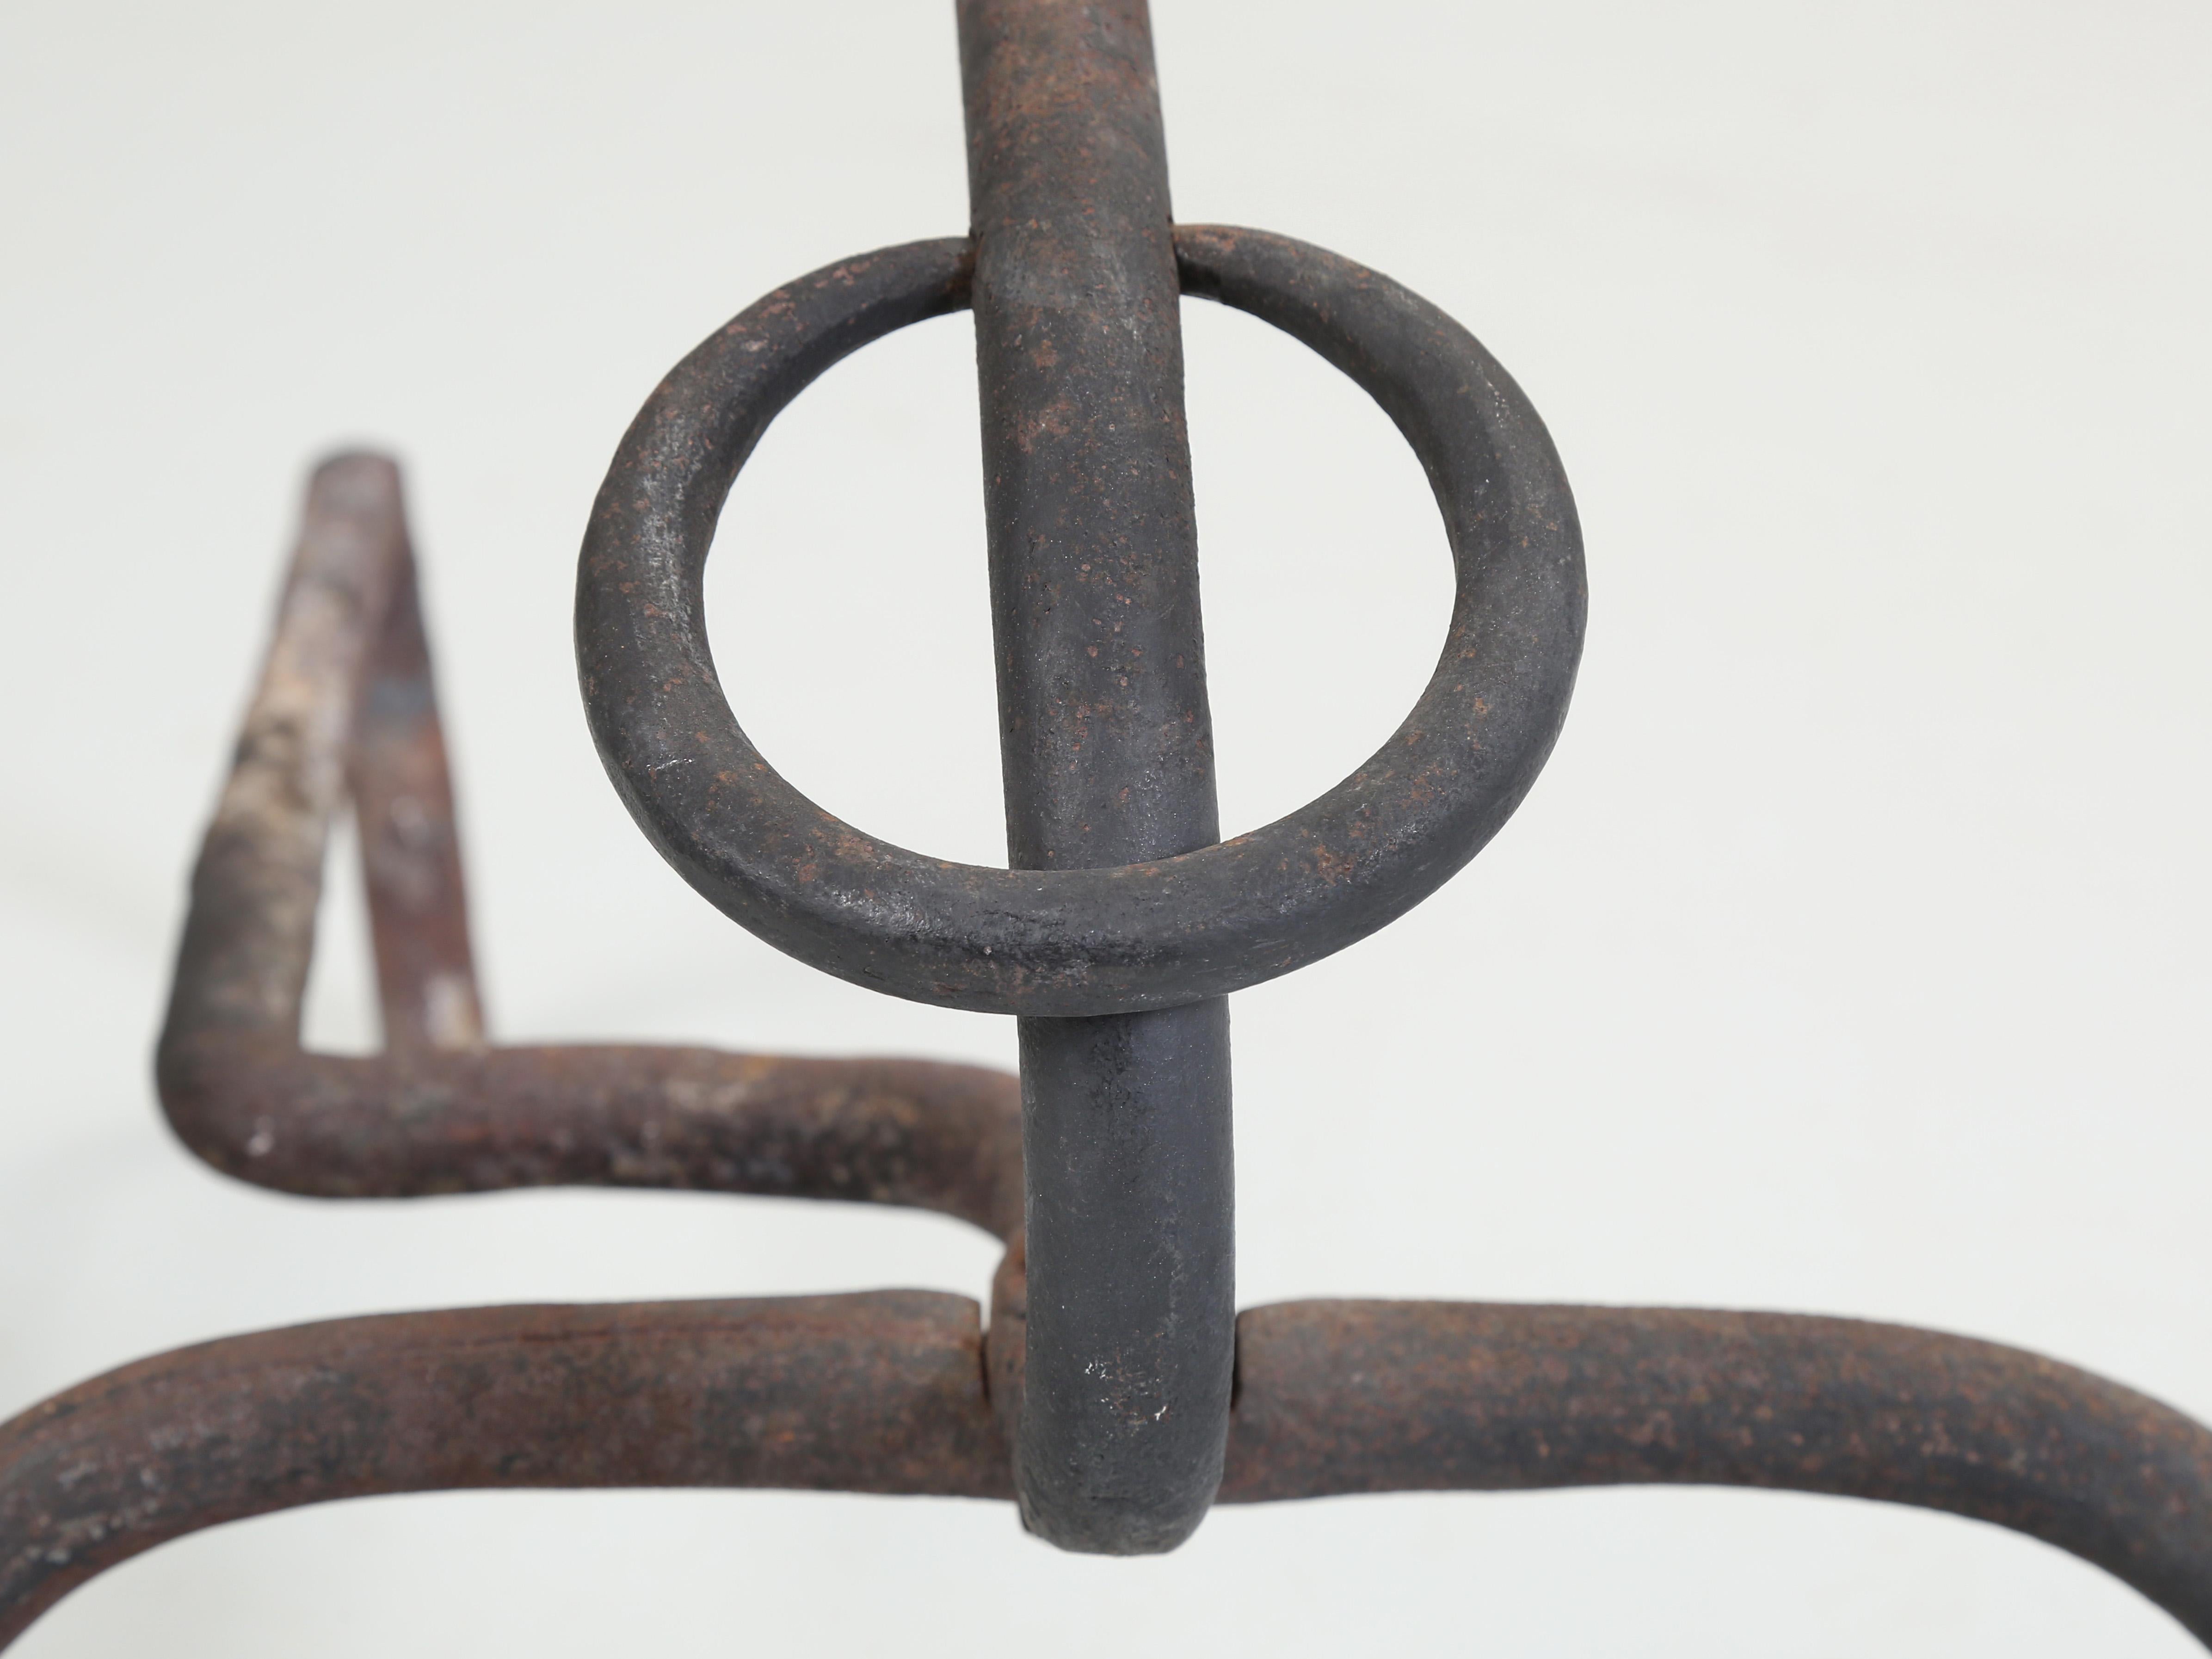 Wrought Iron Fireplace Andirons. Modernist Curled Form with Sphere Top c1940's For Sale 3